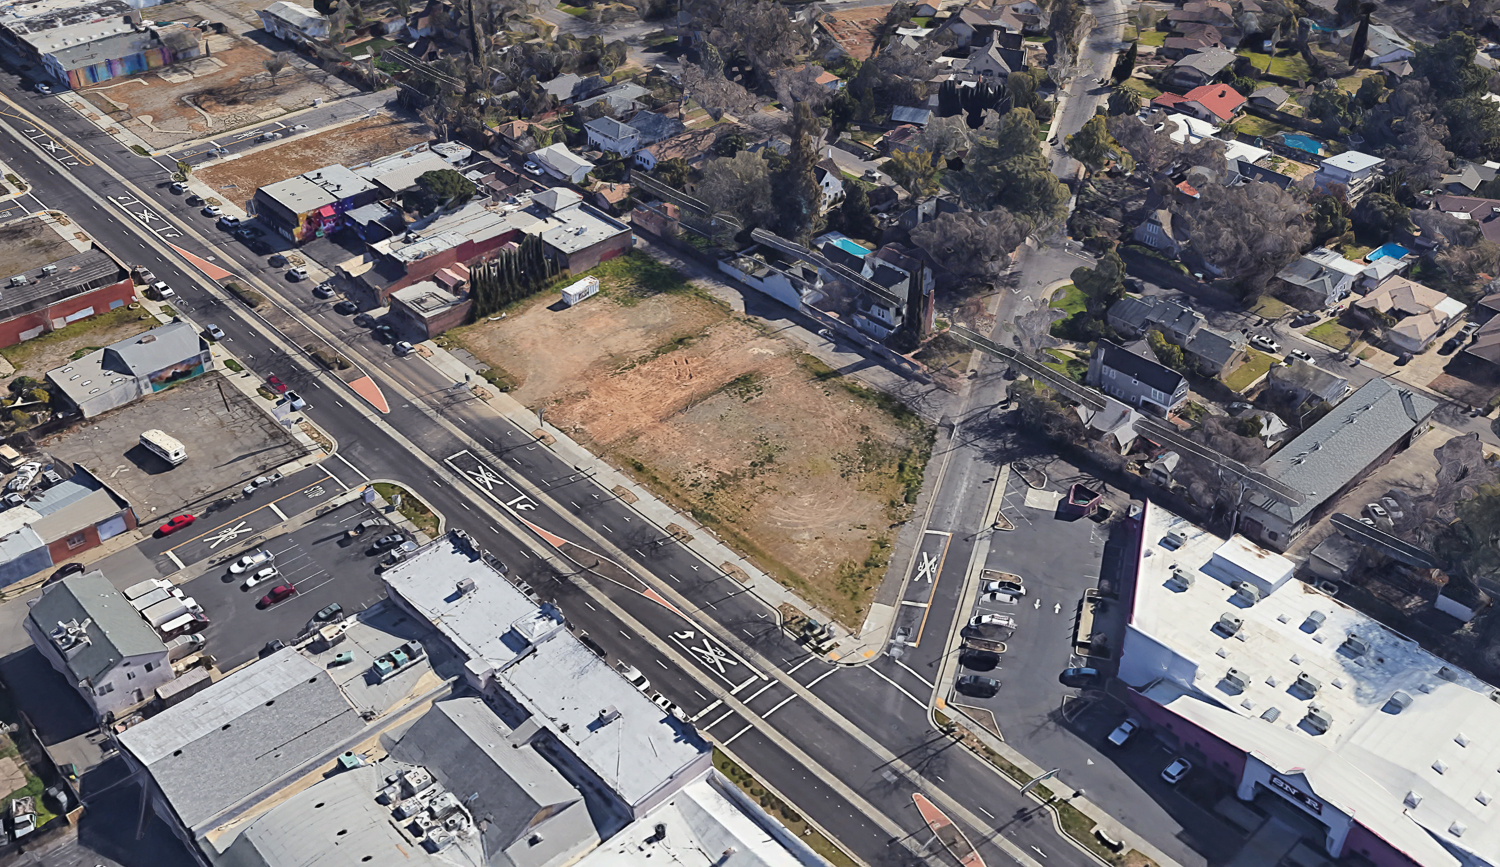 1212 Del Paso Boulevard vacant lot, image by Google Satellite